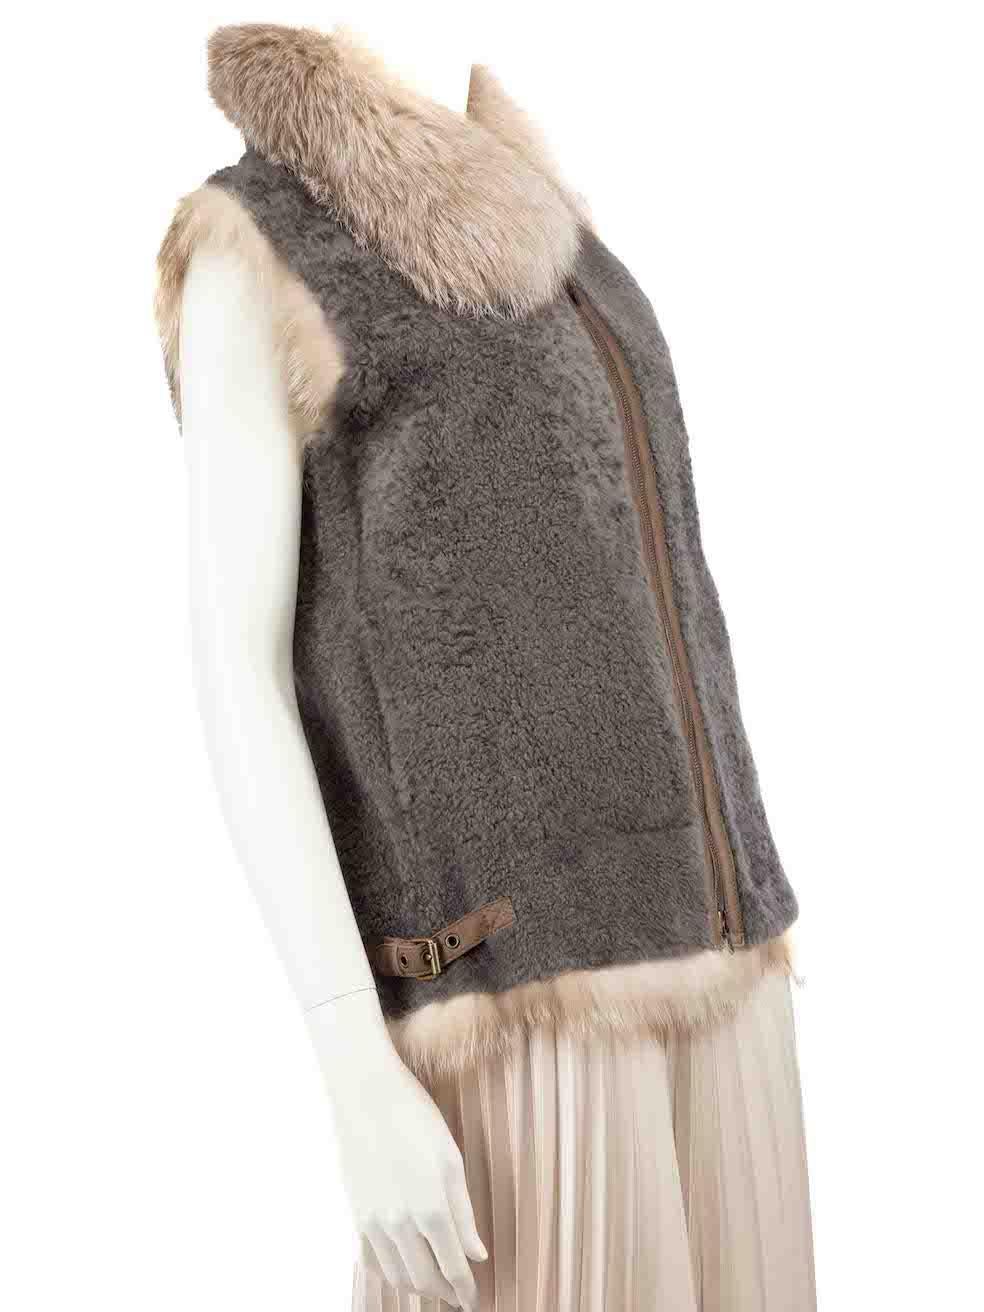 CONDITION is Very good. Hardly any visible wear to jacket is evident on this used Brunello Cucinelli designer resale item.
 
 
 
 Details
 
 
 Grey
 
 Shearling
 
 Gilet
 
 Fur trim
 
 Leather lining
 
 2x Side pockets
 
 Zip fastening
 
 
 
 
 
